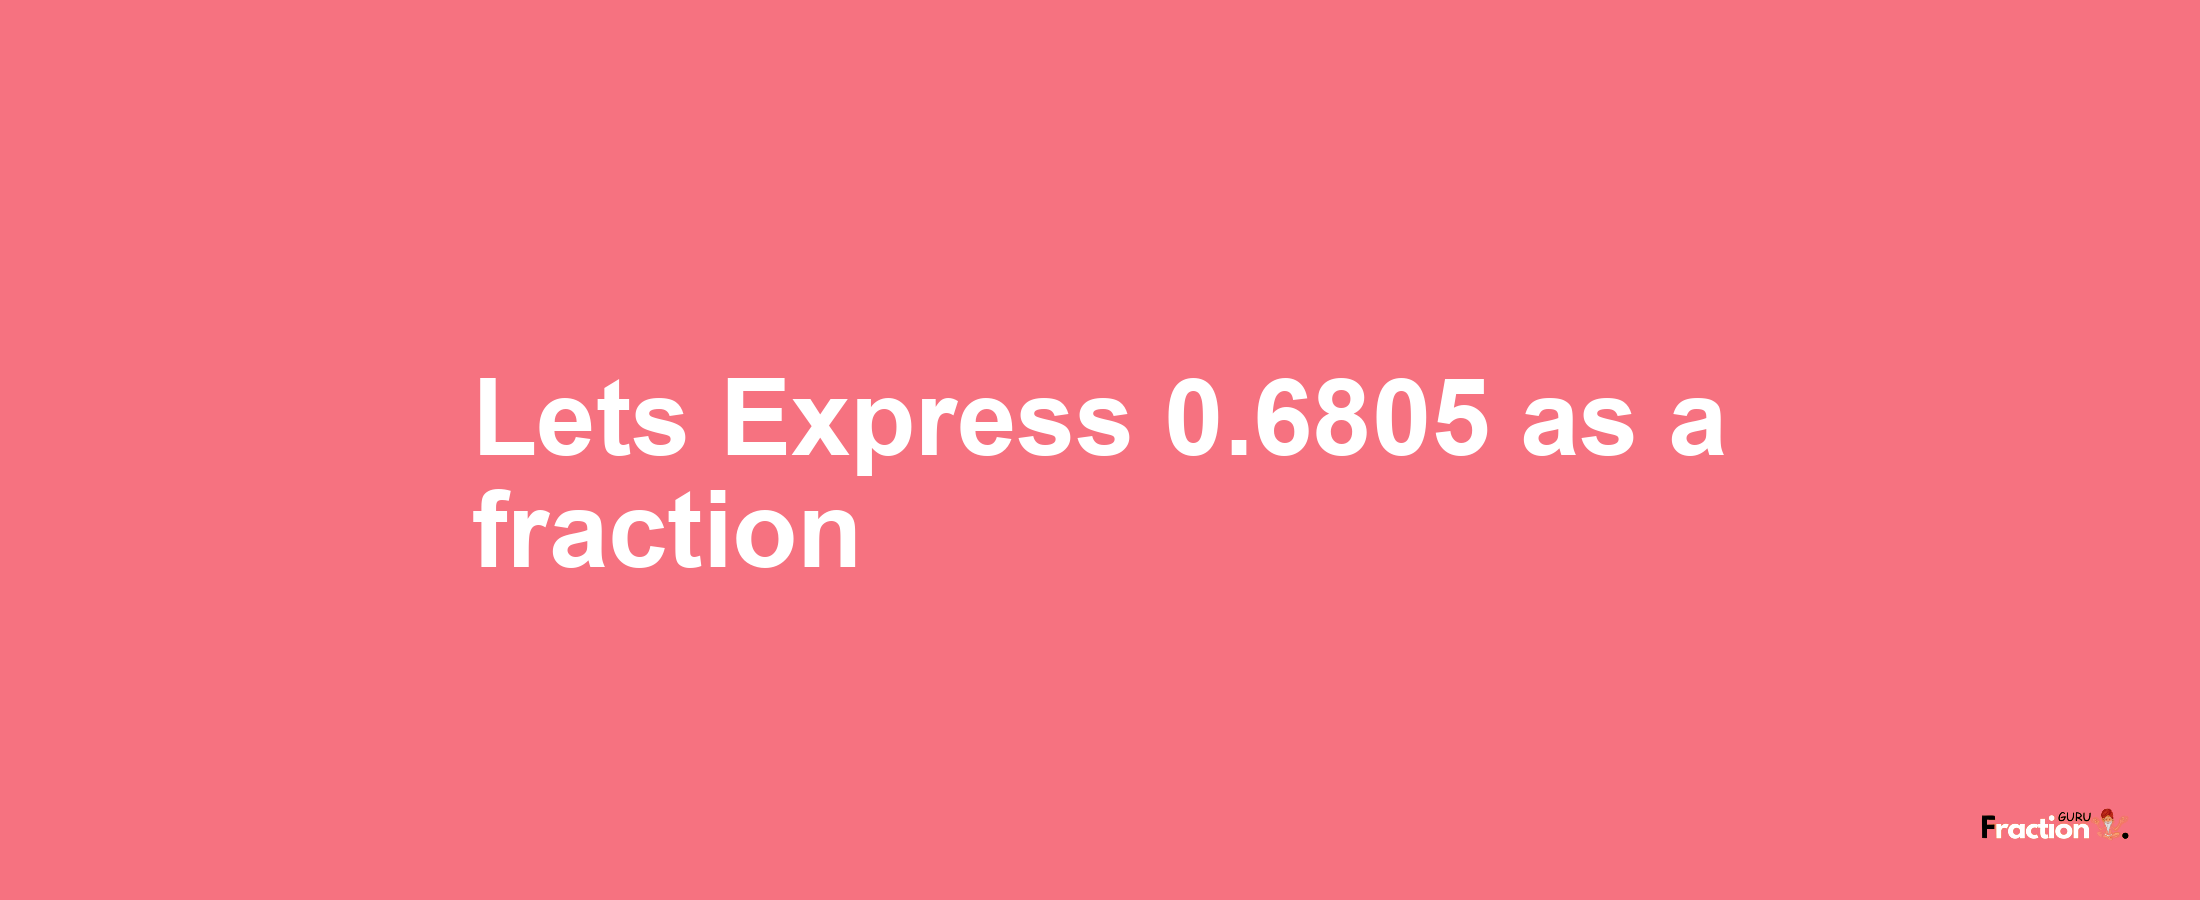 Lets Express 0.6805 as afraction